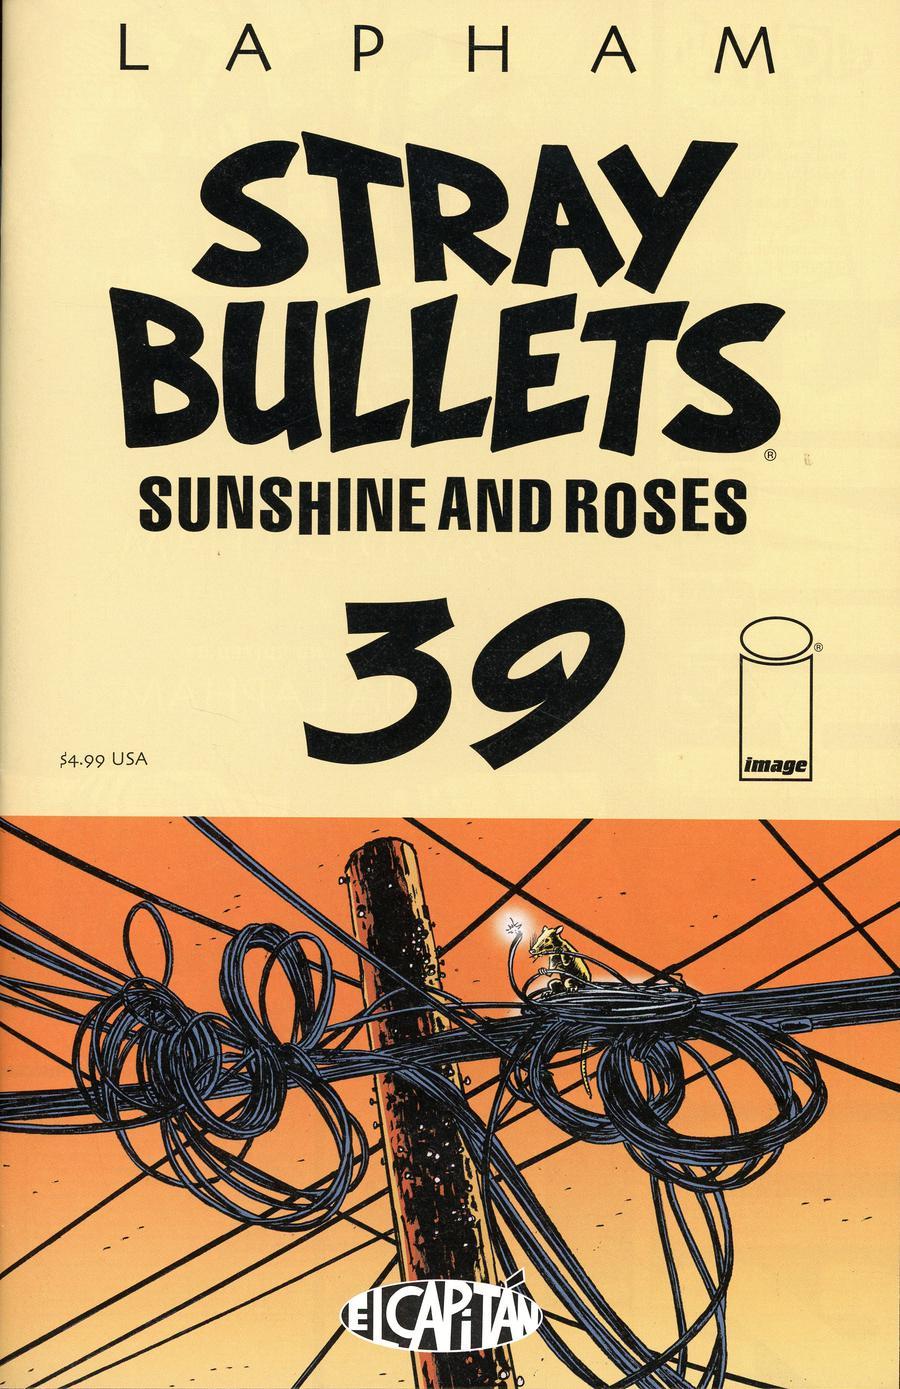 Stray Bullets Sunshine And Roses Vol. 1 #39